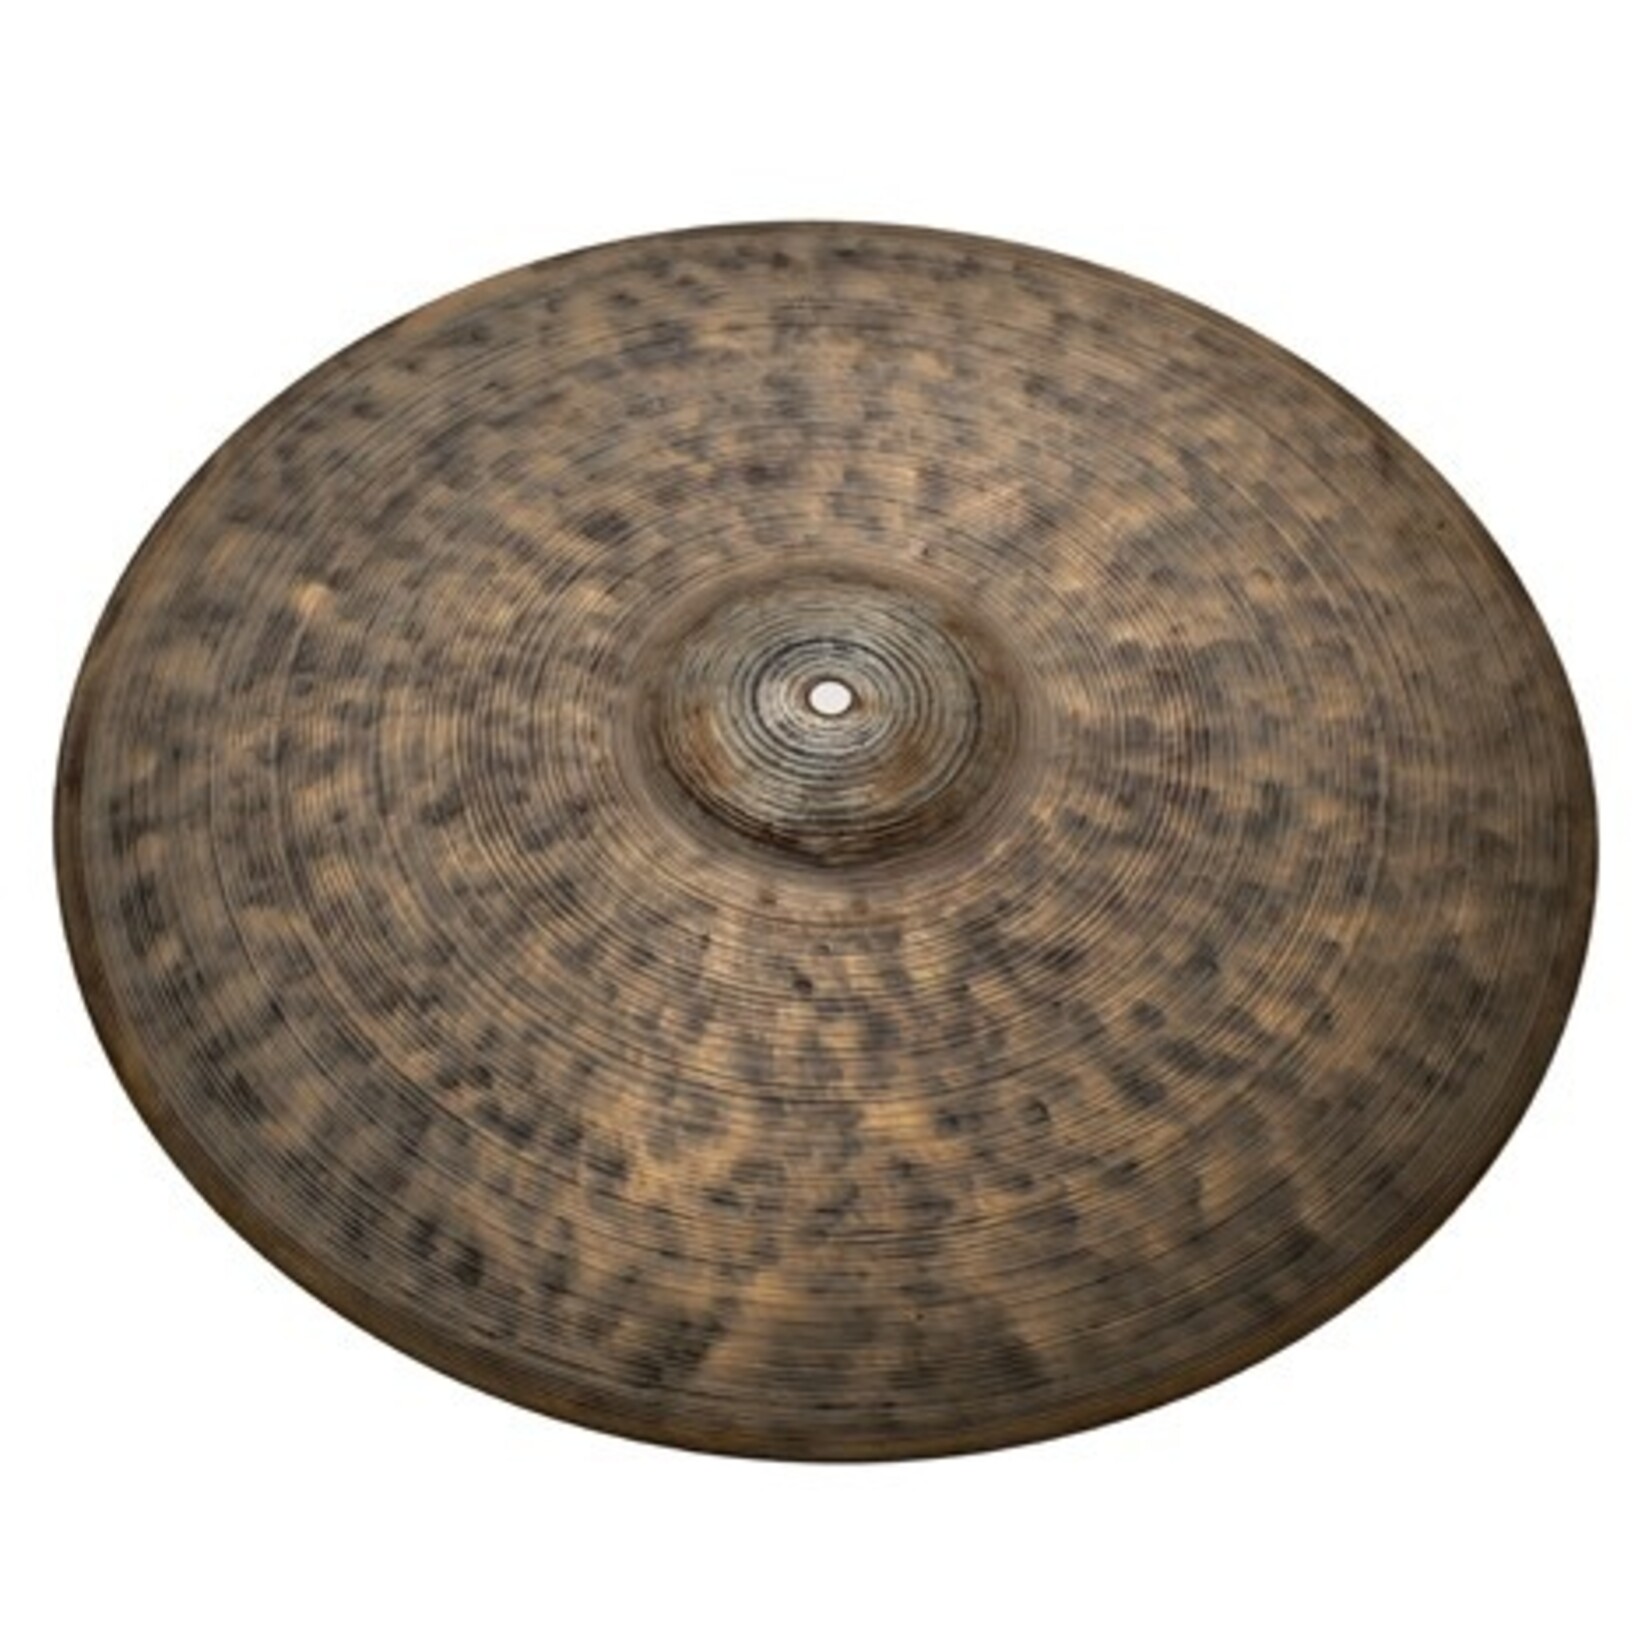 Istanbul Agop Istanbul Agop 30th Anniversary Ride 20"